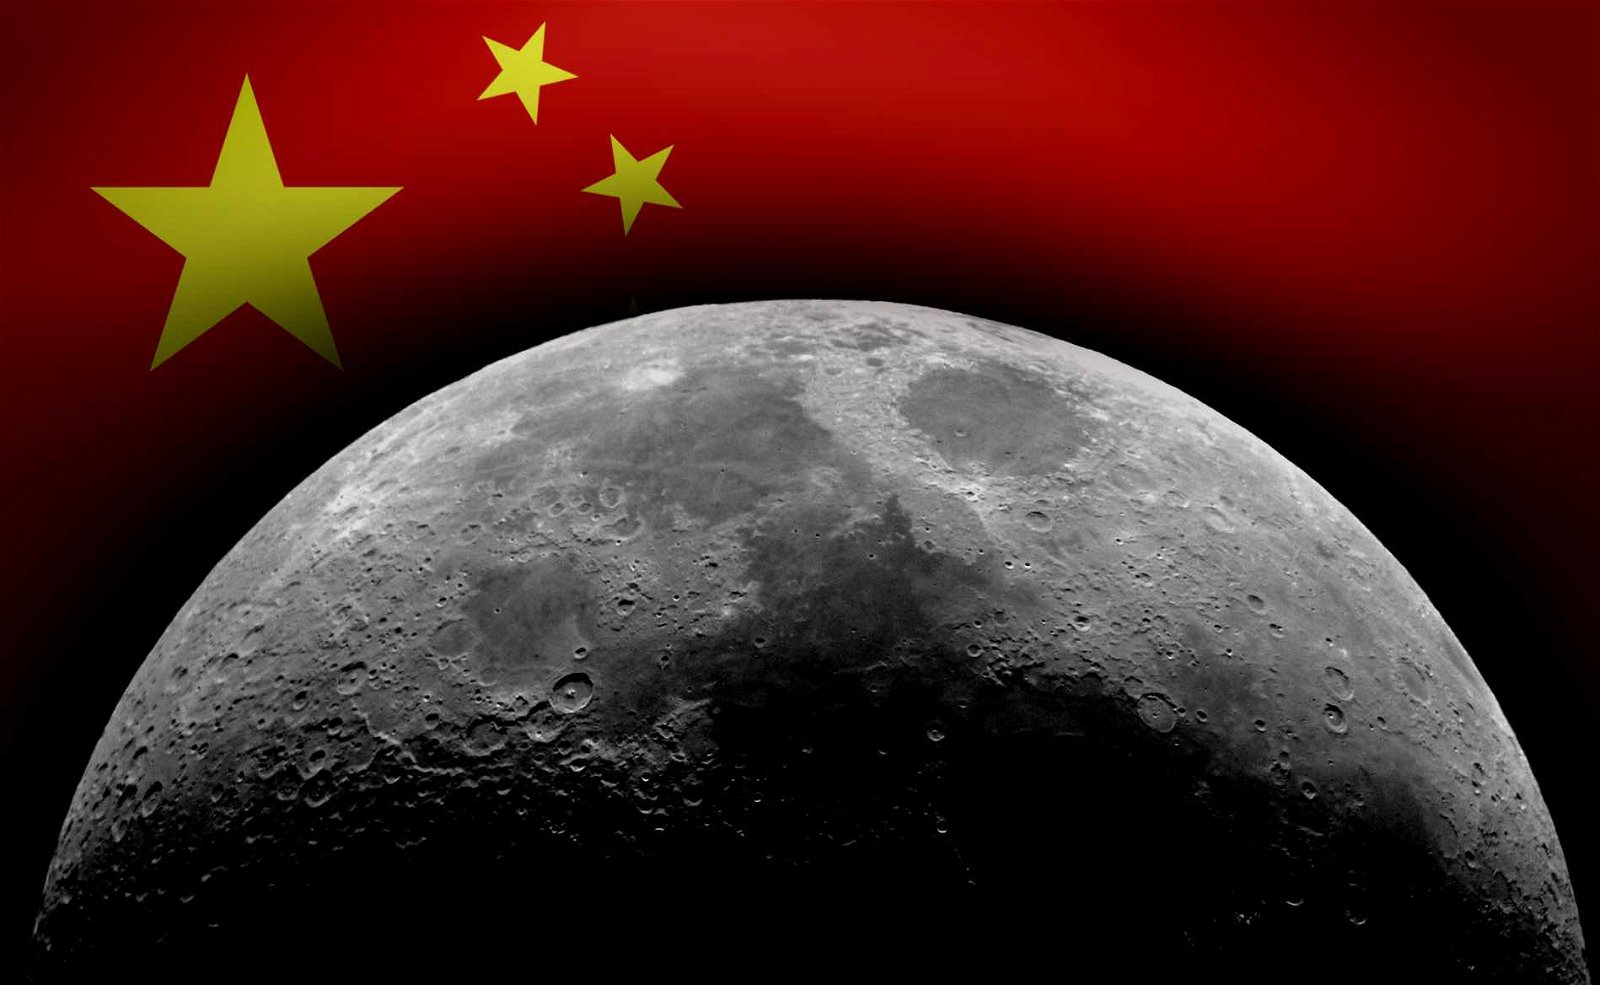 600-Million-Camera ‘Skynet’ Basis for New Lunar Spy System as China Pursues Surveillance State Beyond Earth